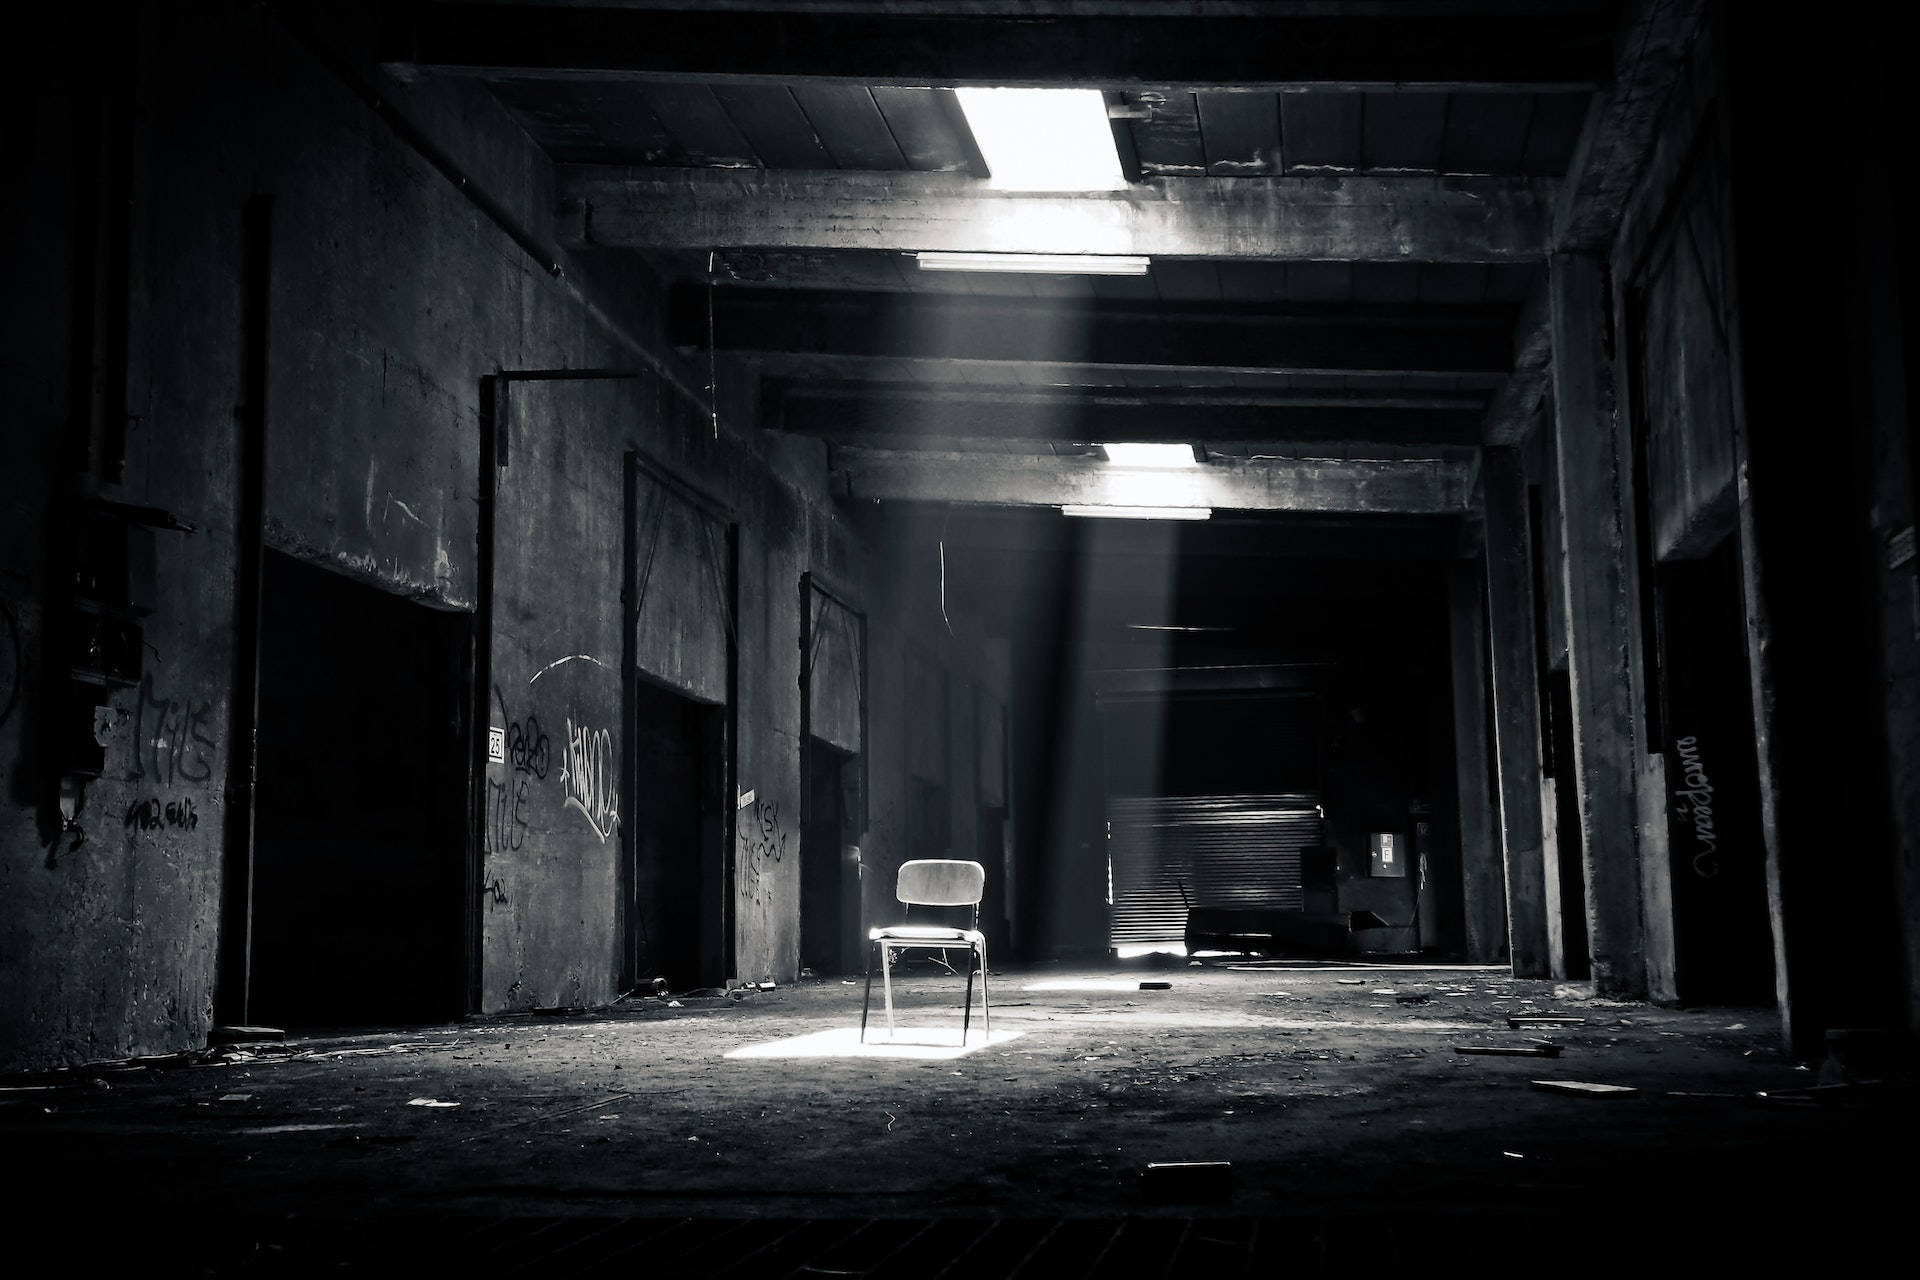 Chair Inside Black Abandoned Building PC Wallpaper